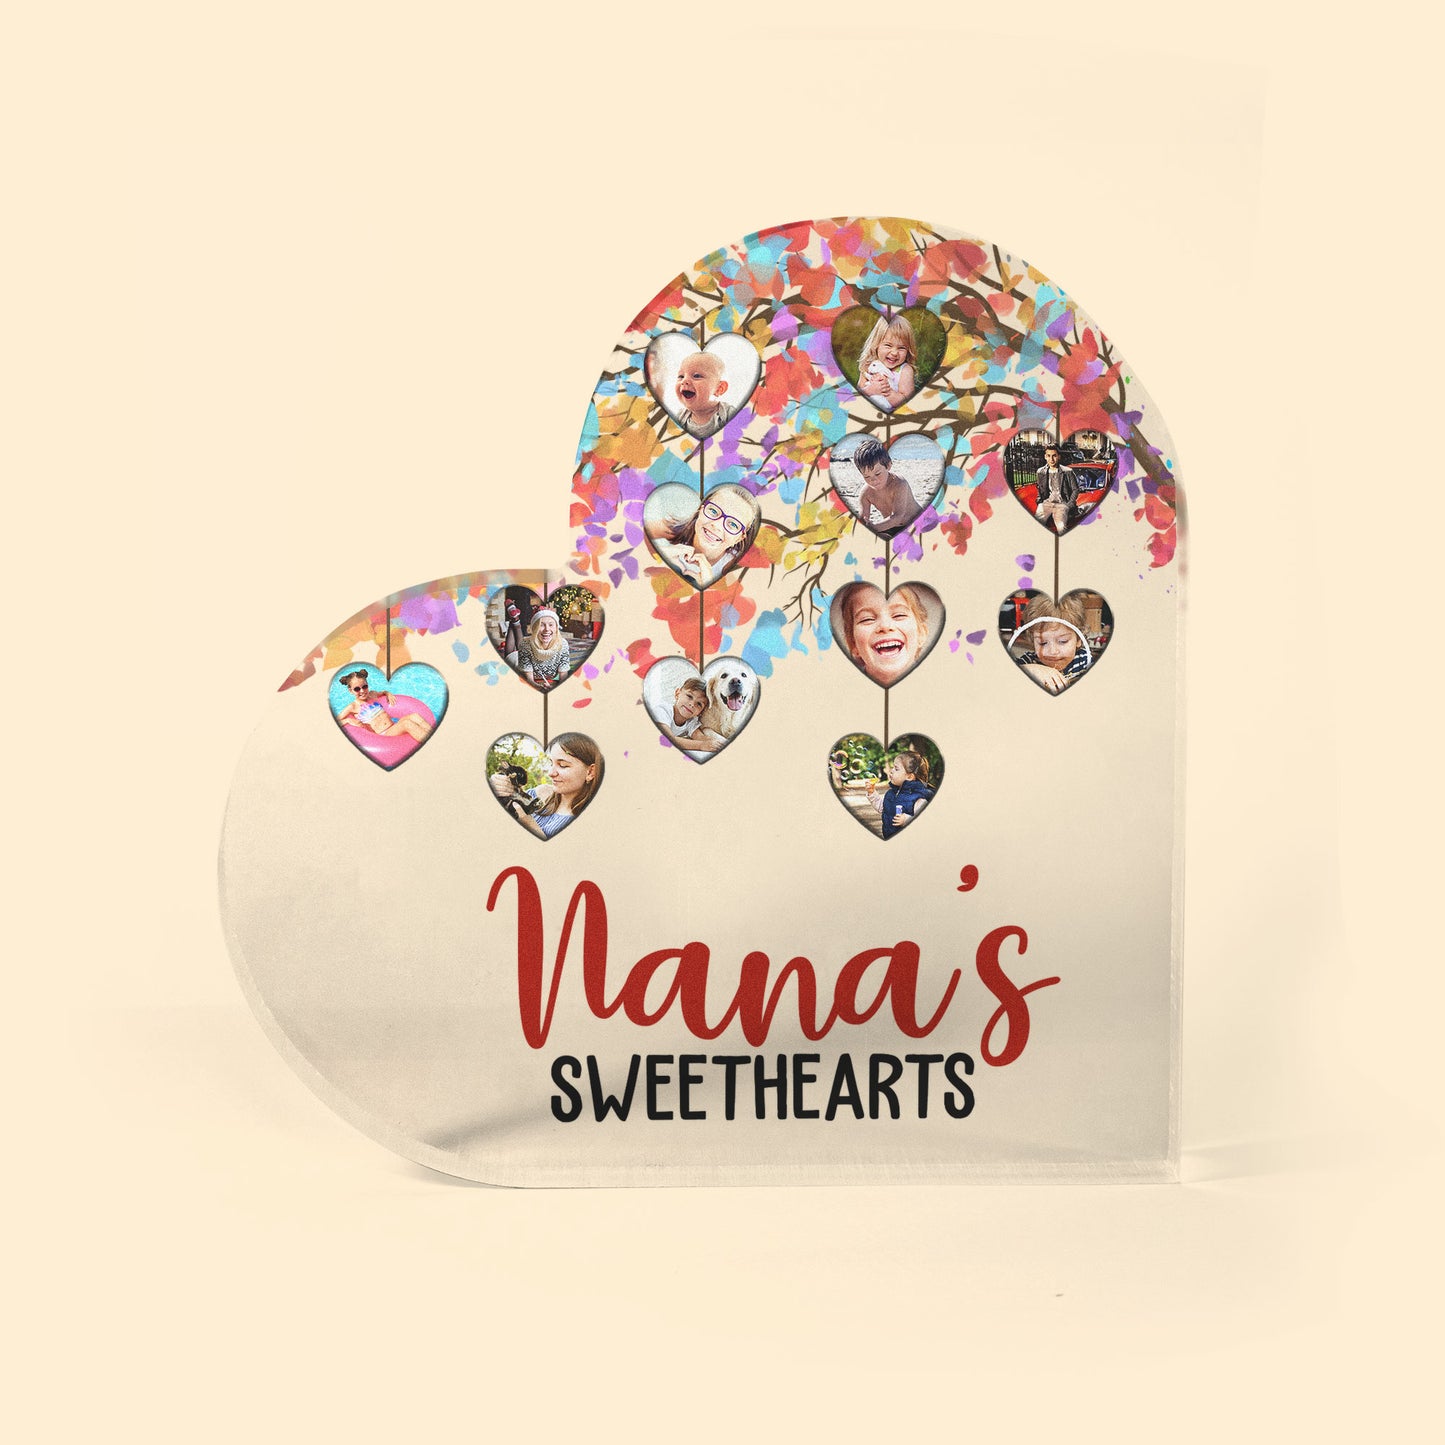 The Greatest Blessing For Your Heart - Personalized Heart Shaped Acrylic Plaque